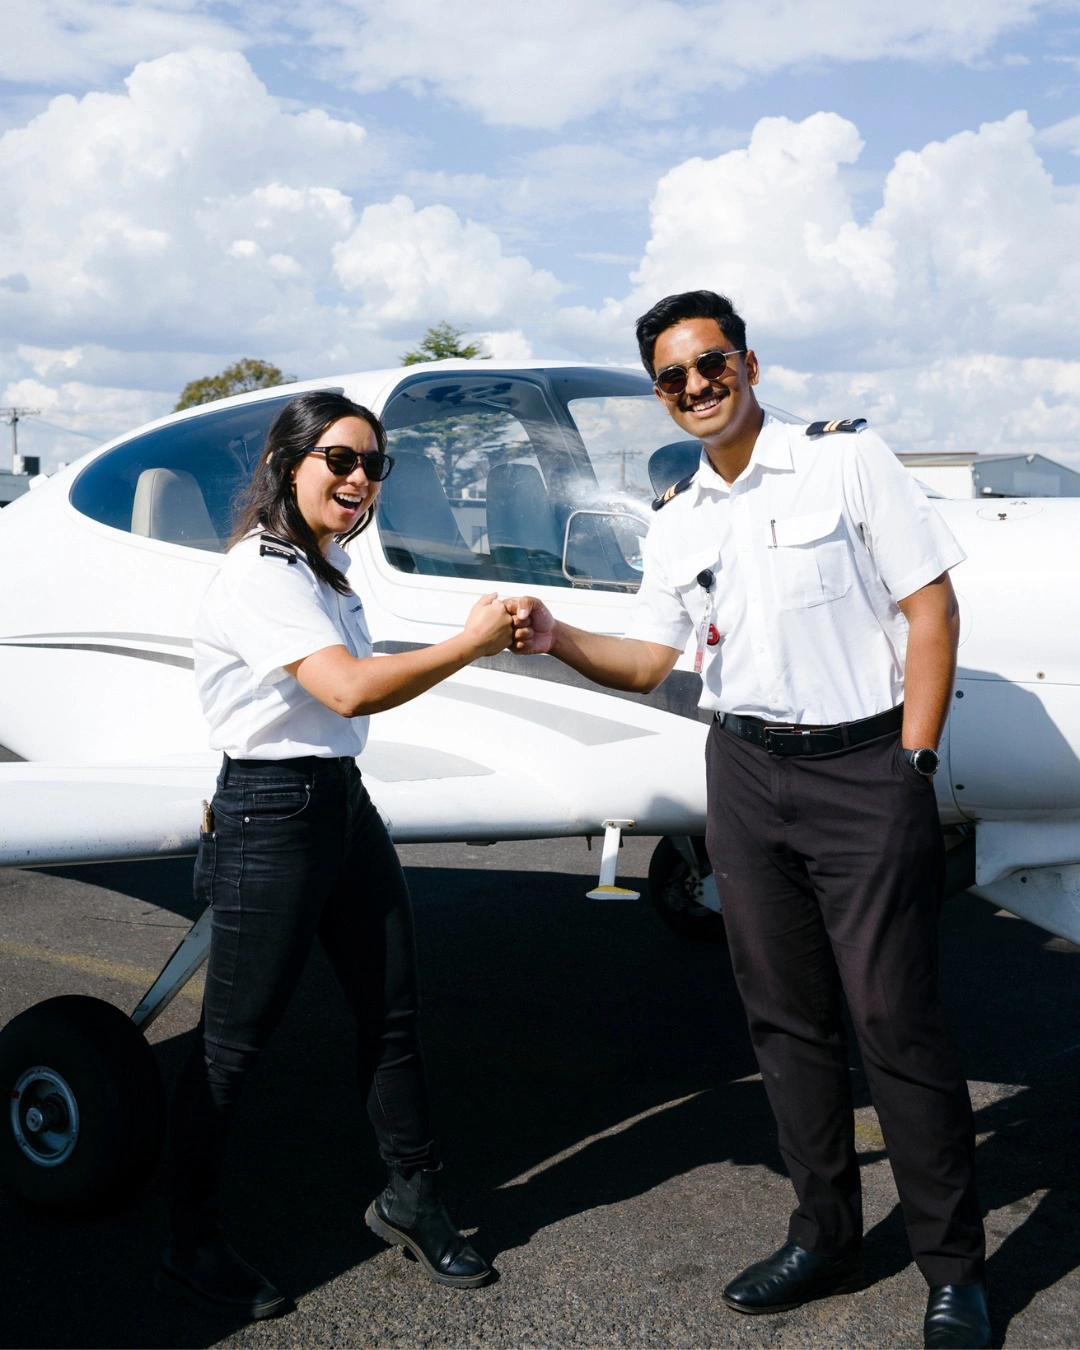 Choosing the Right Pilot Course for You